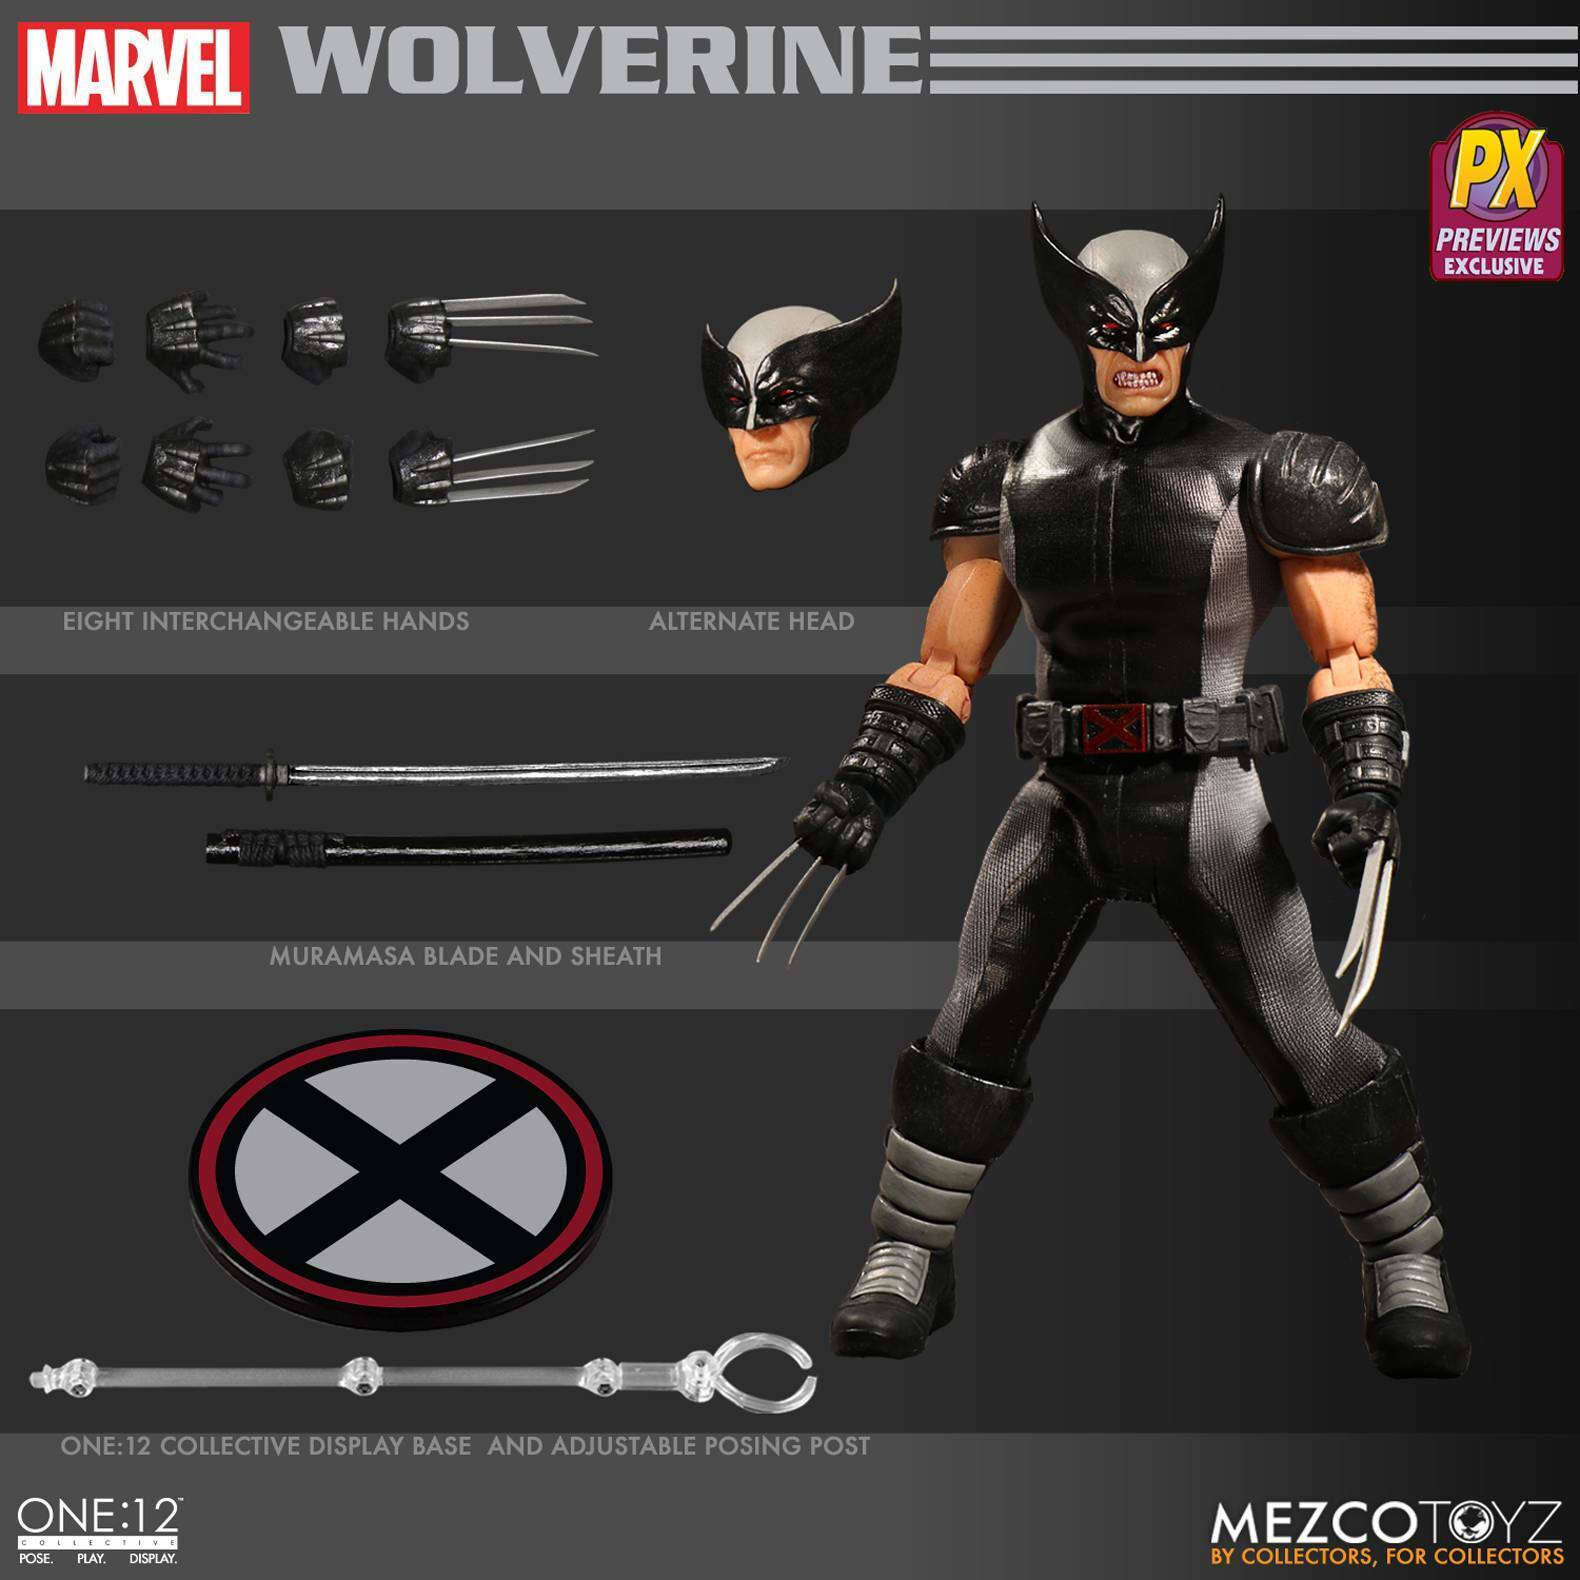 Wolverine X-Force One:12 Collective PX action figure